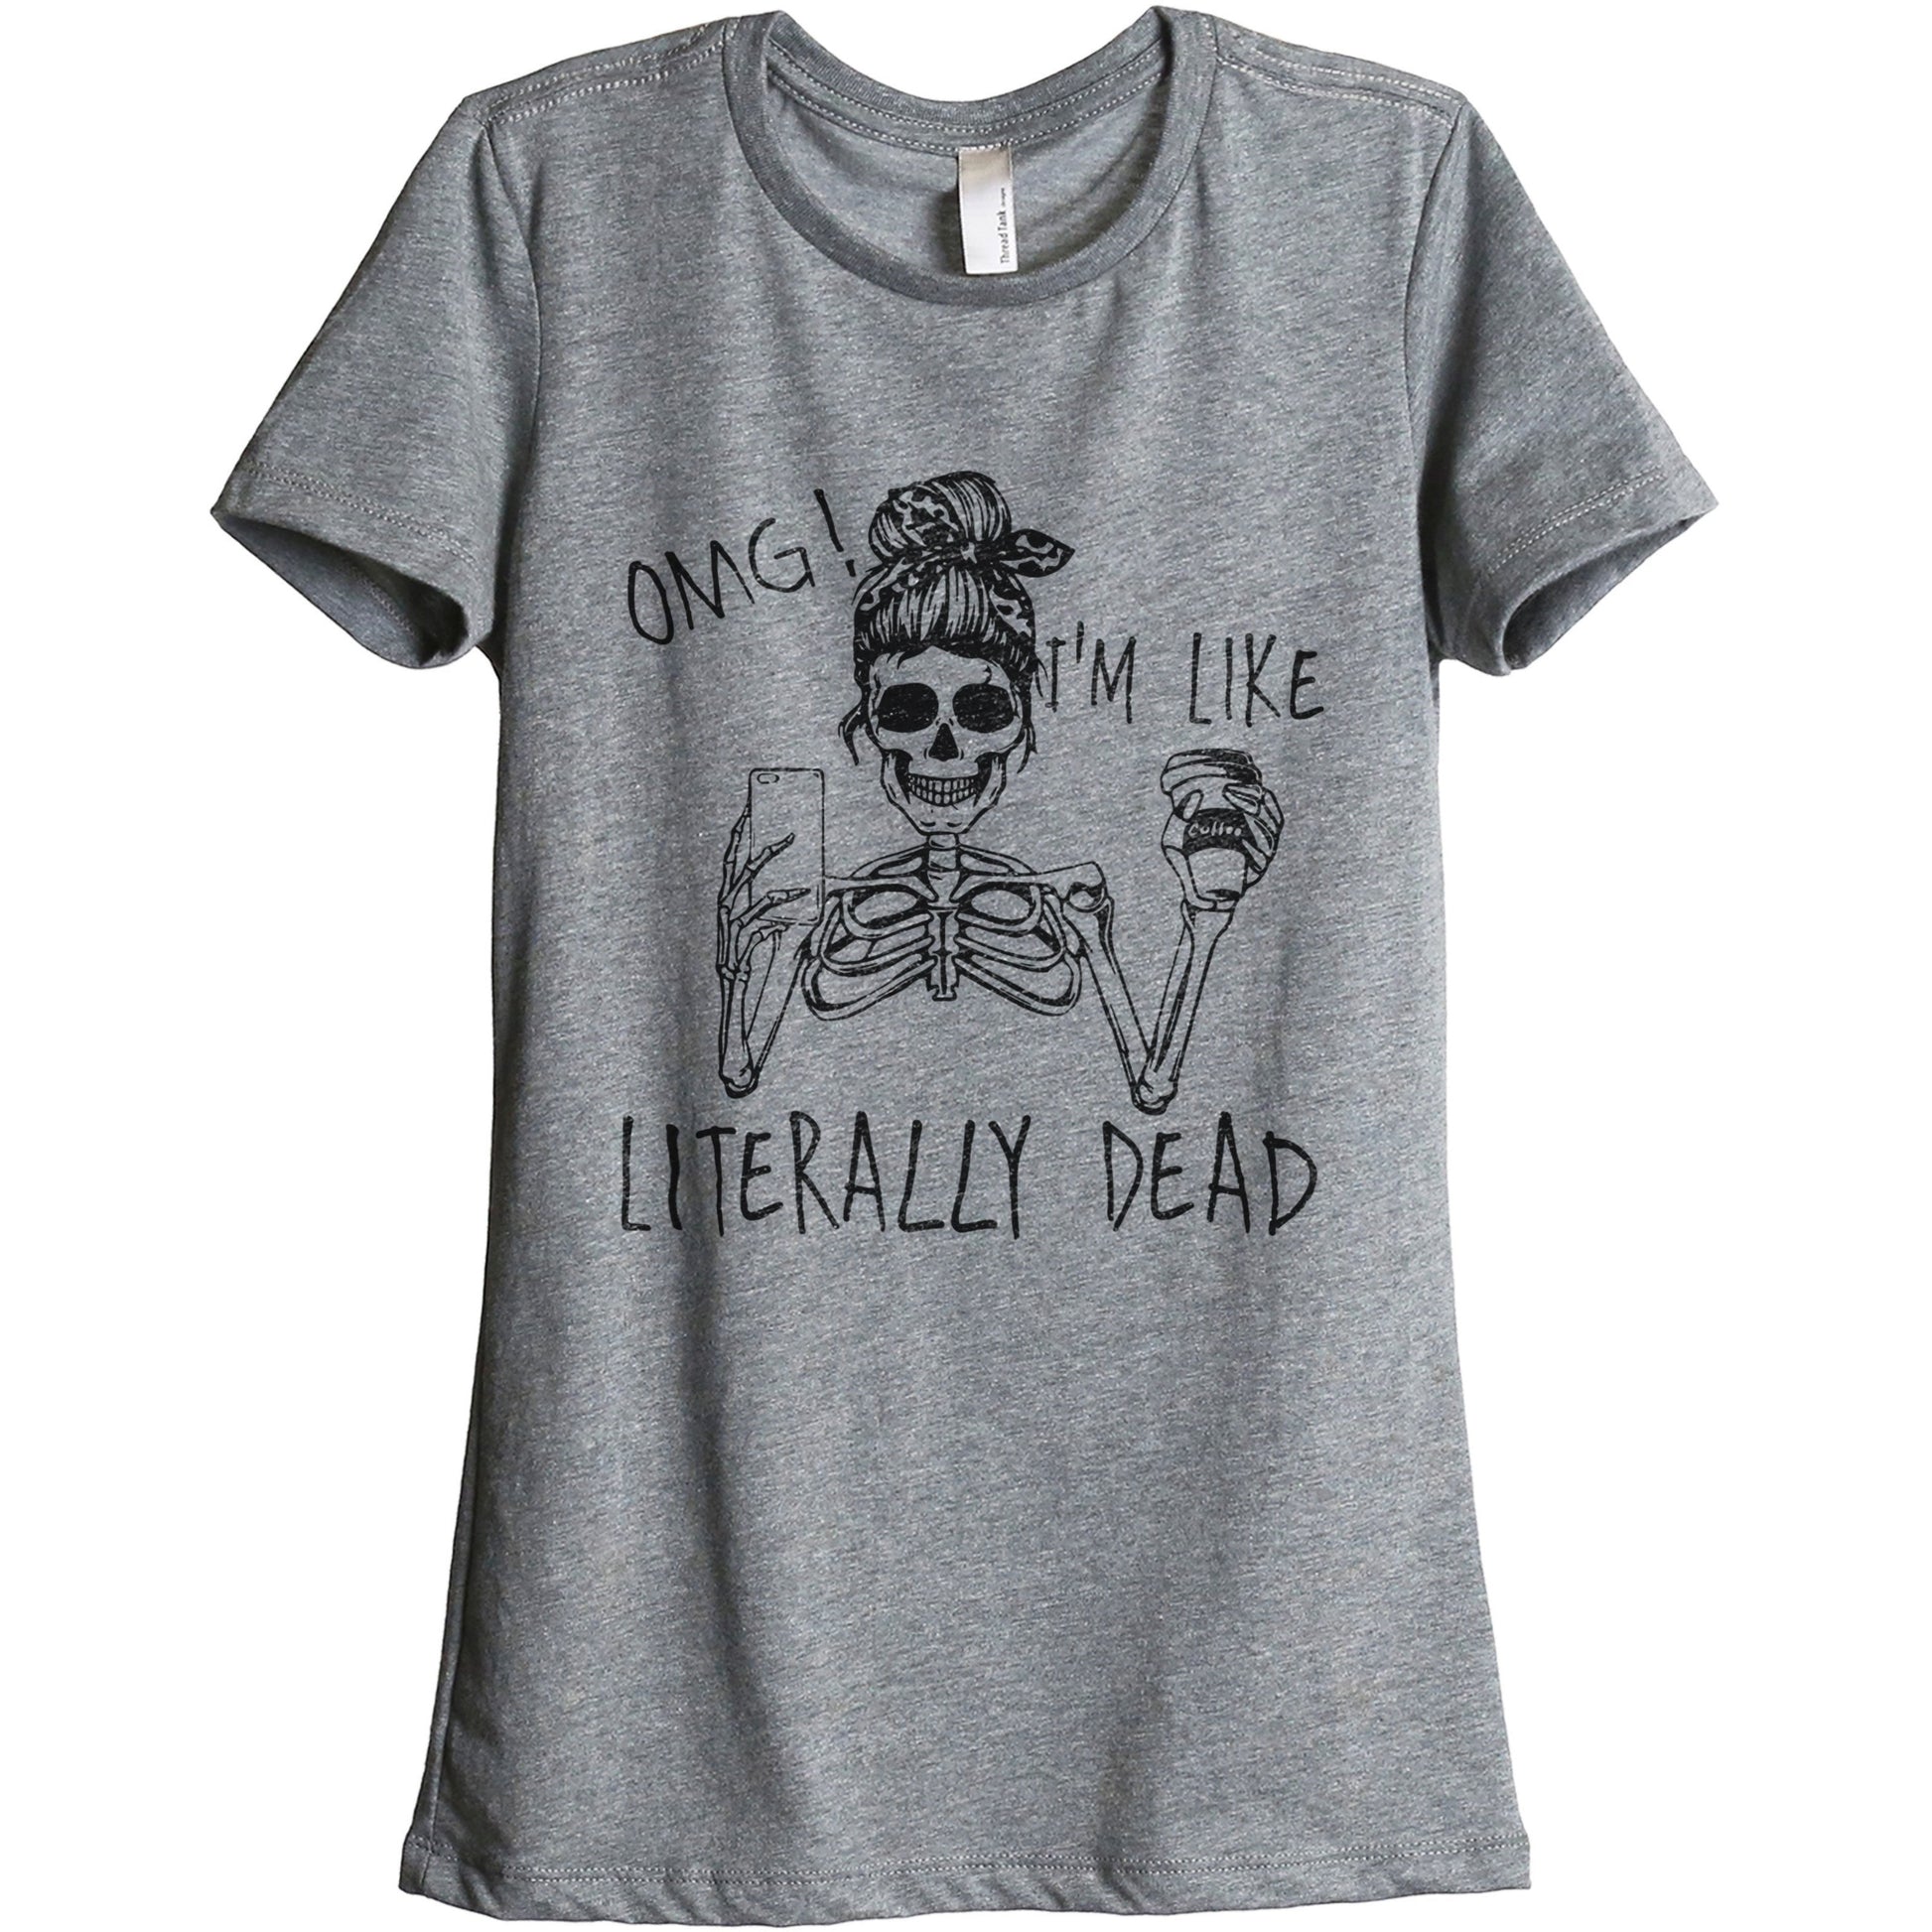 Omg, I'm Like Literally Dead - thread tank | Stories you can wear.